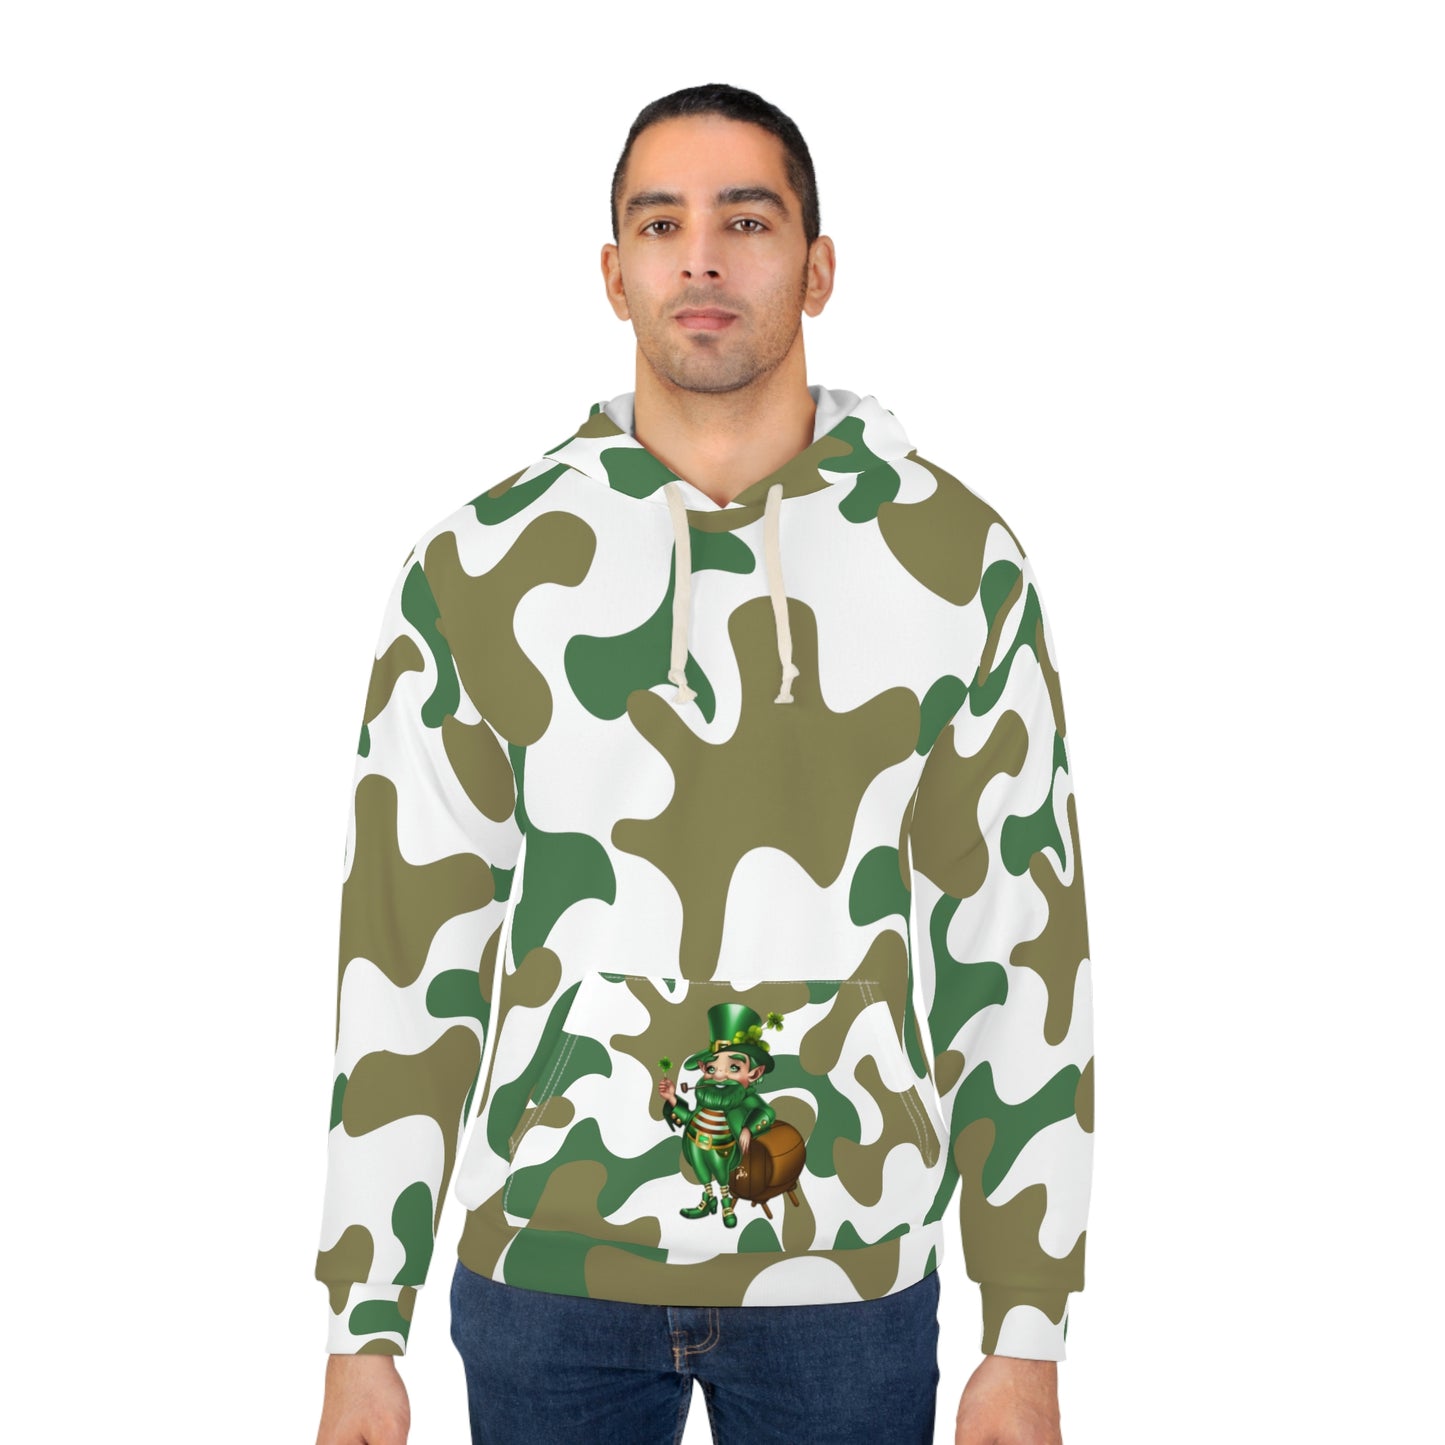 Hoodie White AOP Unisex Pullover Hoodie, Camouflage Hoodie, Green man Irish St. Patrick's Day ,For Men and Women